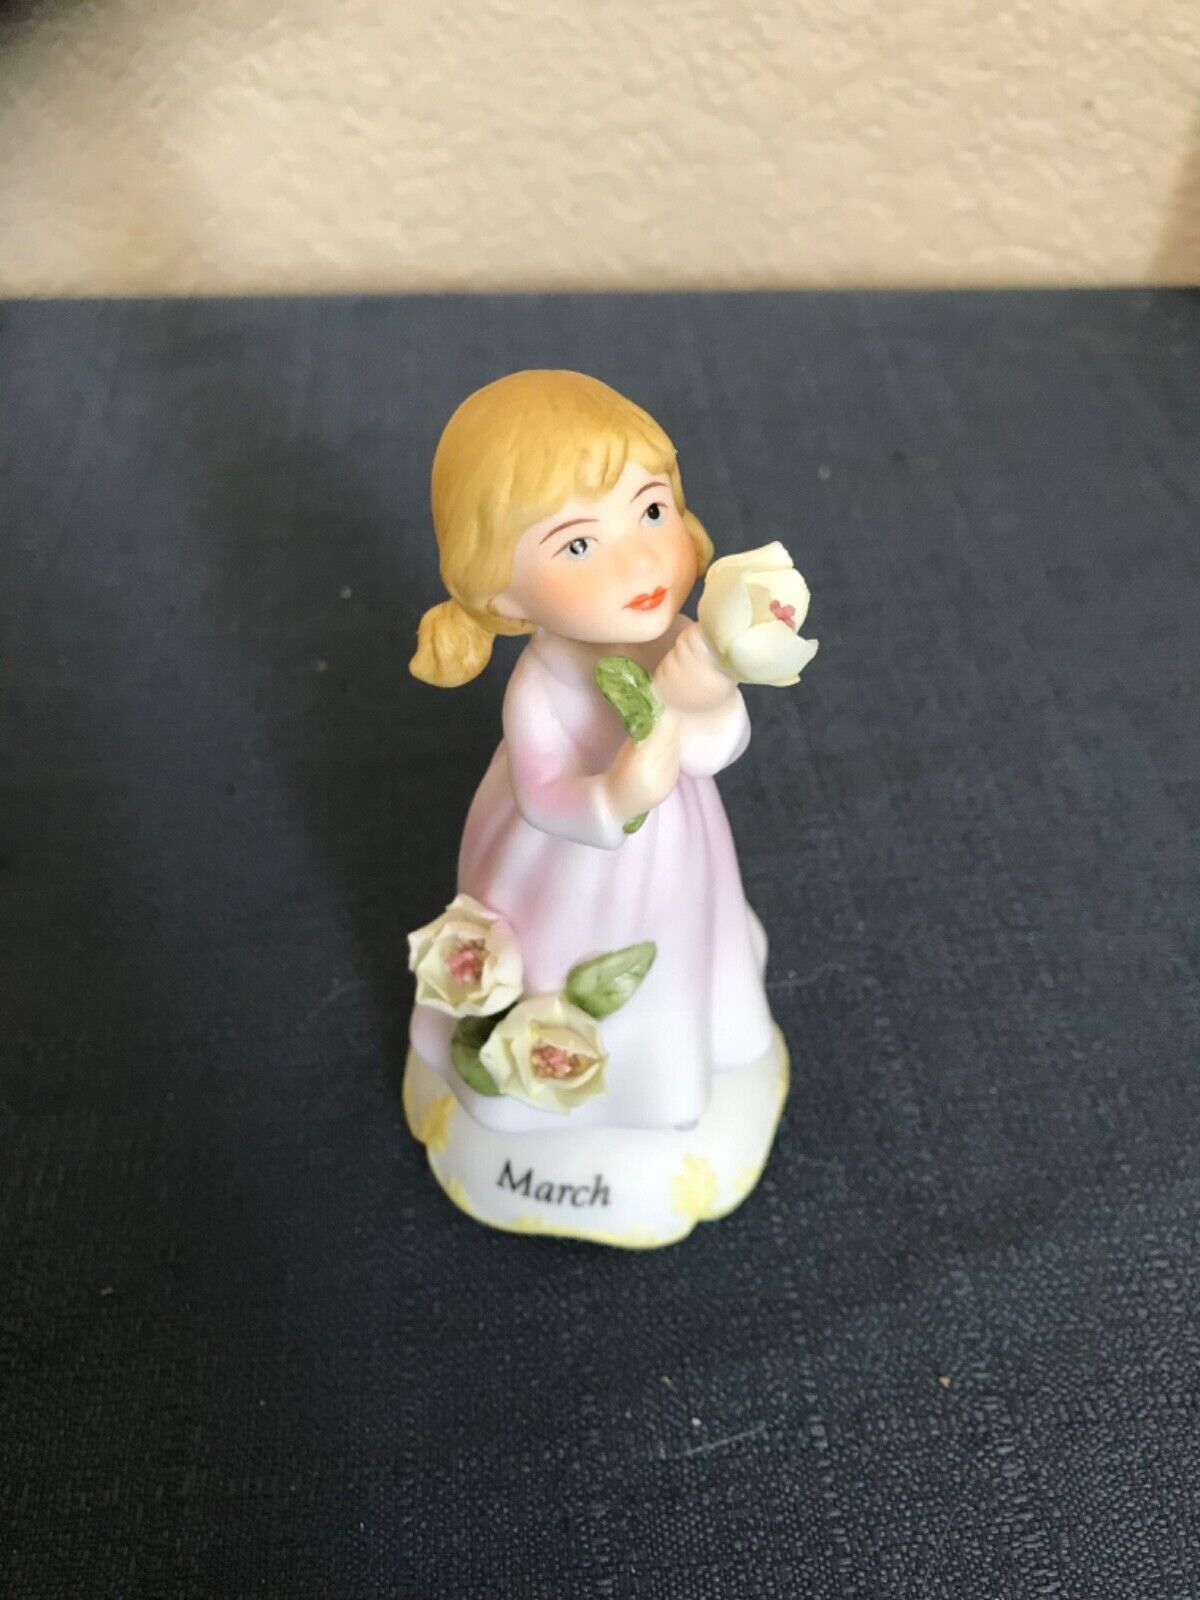 VINTAGE MARCH ANGEL PINK DRESS YELLOW ROSES FLOWERS FIGURINE